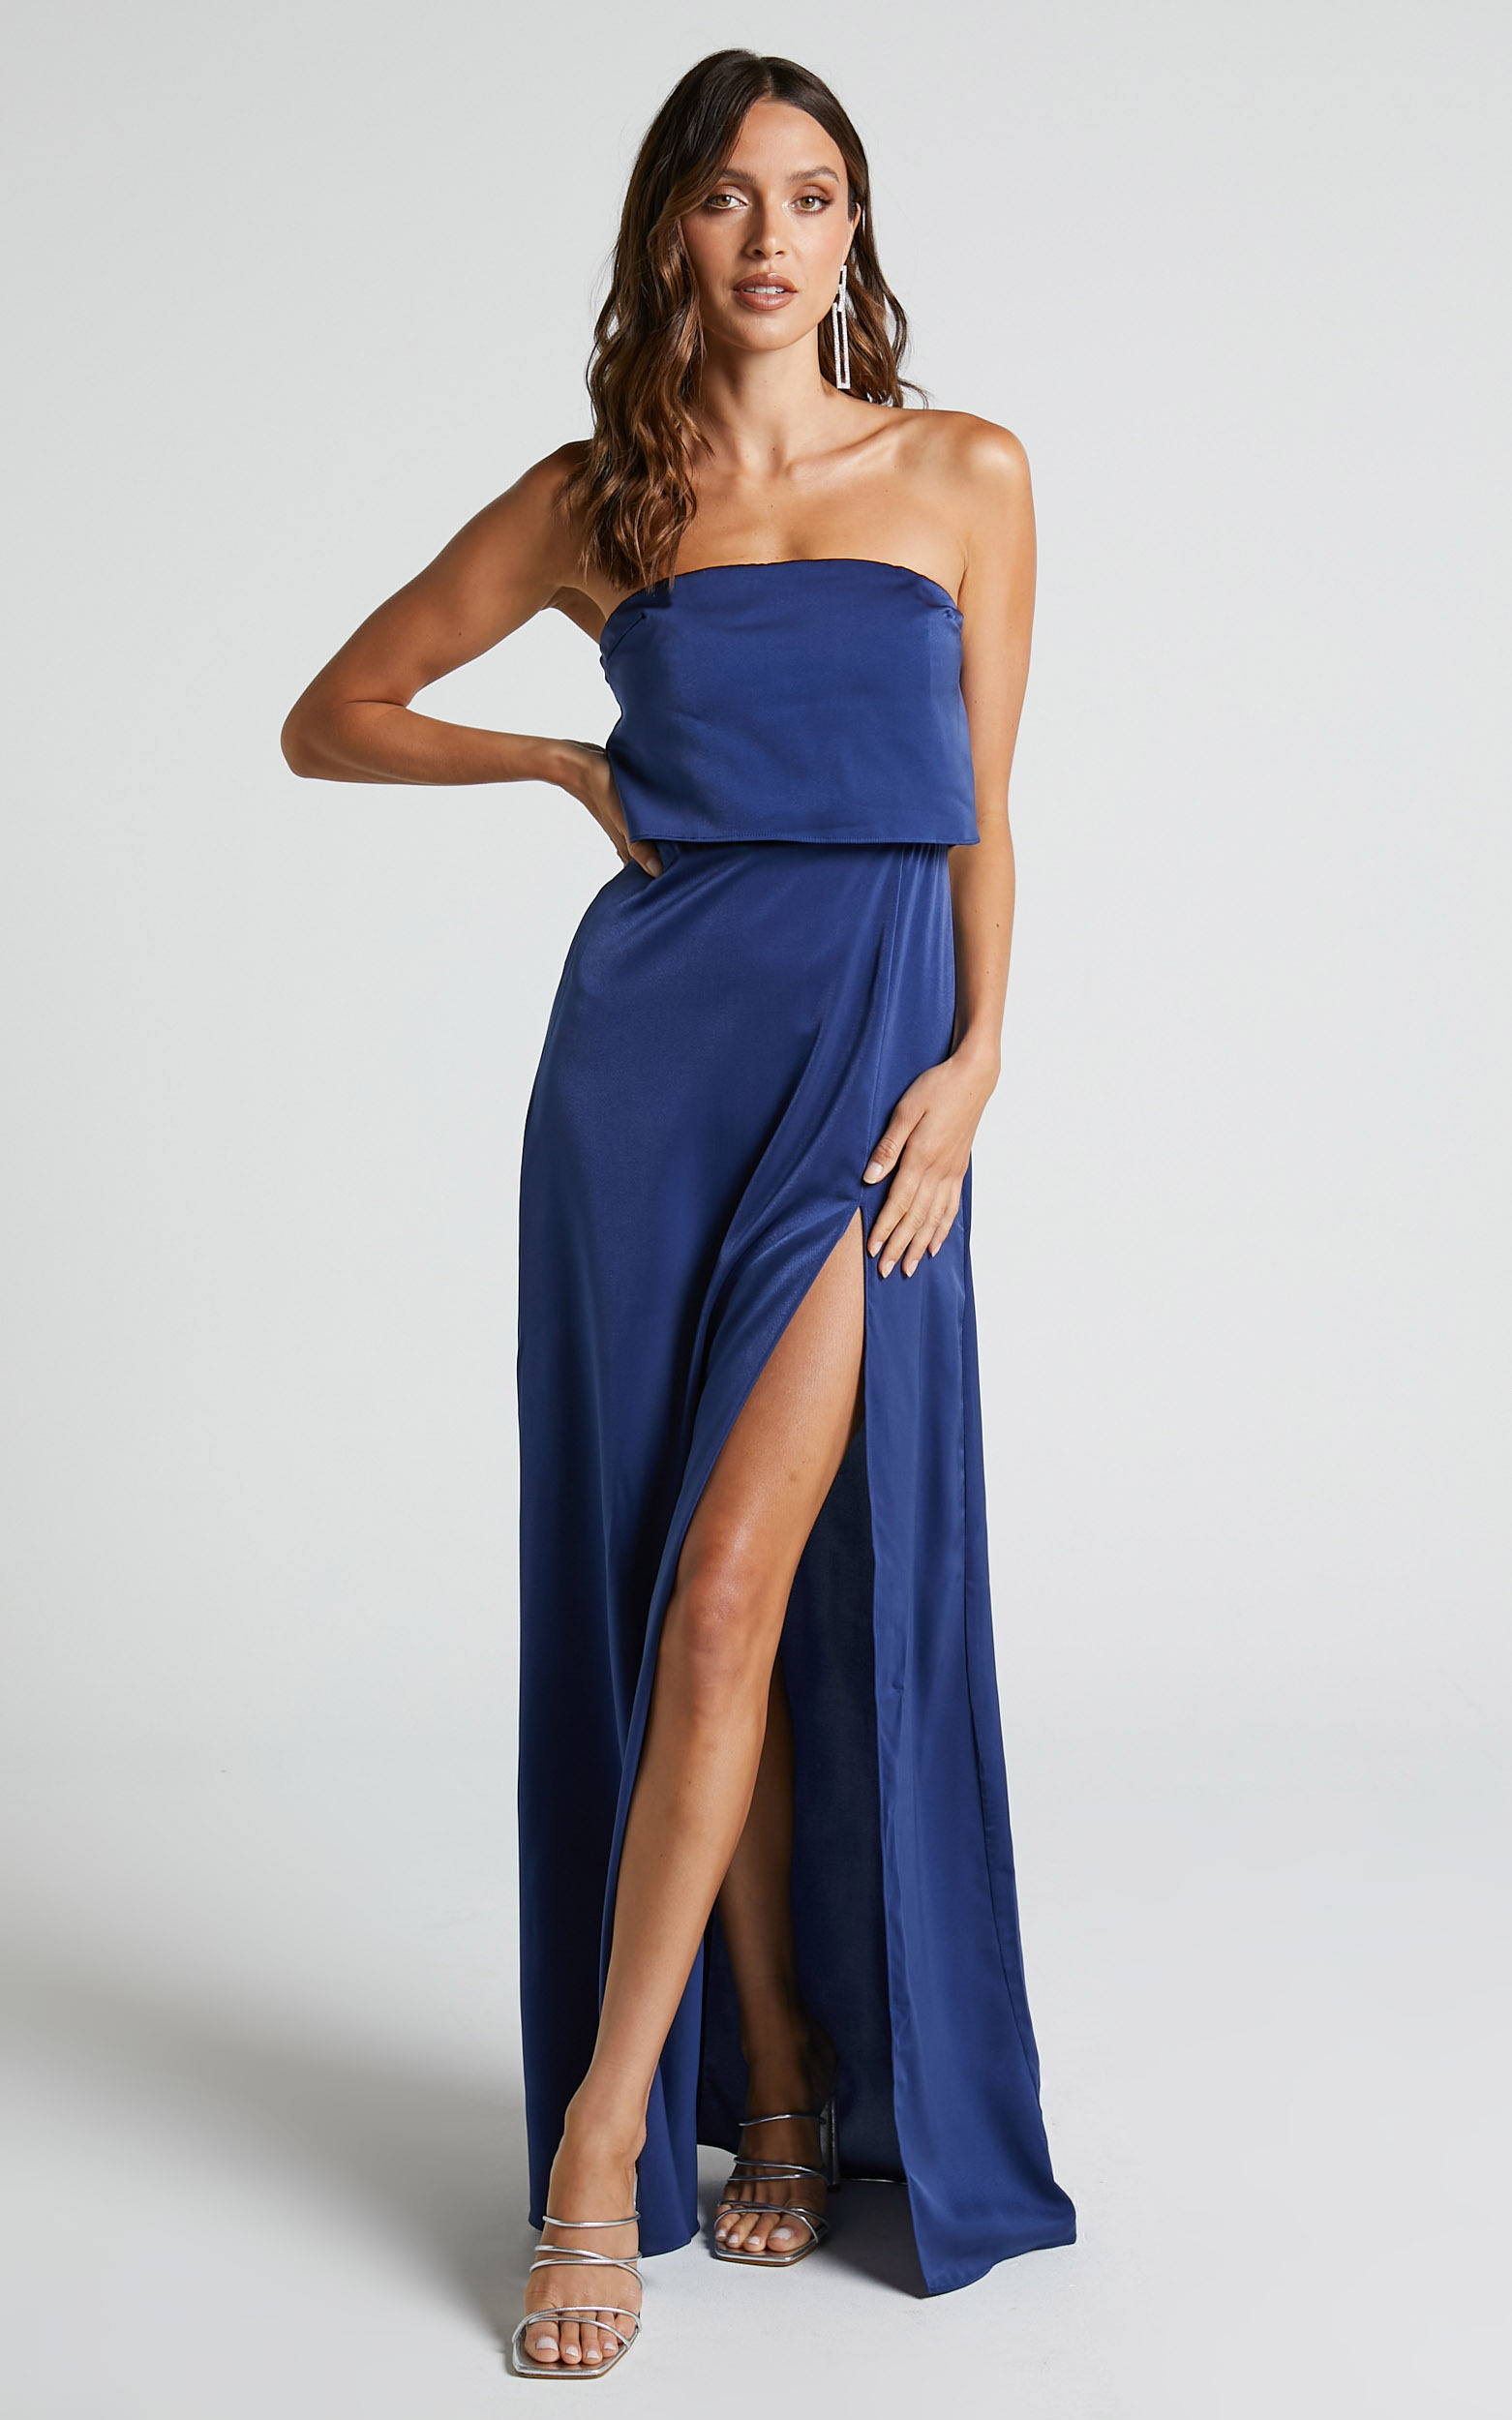 Rhyanna Maxi Dress - Strapless Thigh Split Satin Dress in Navy - 06, NVY1, hi-res image number null